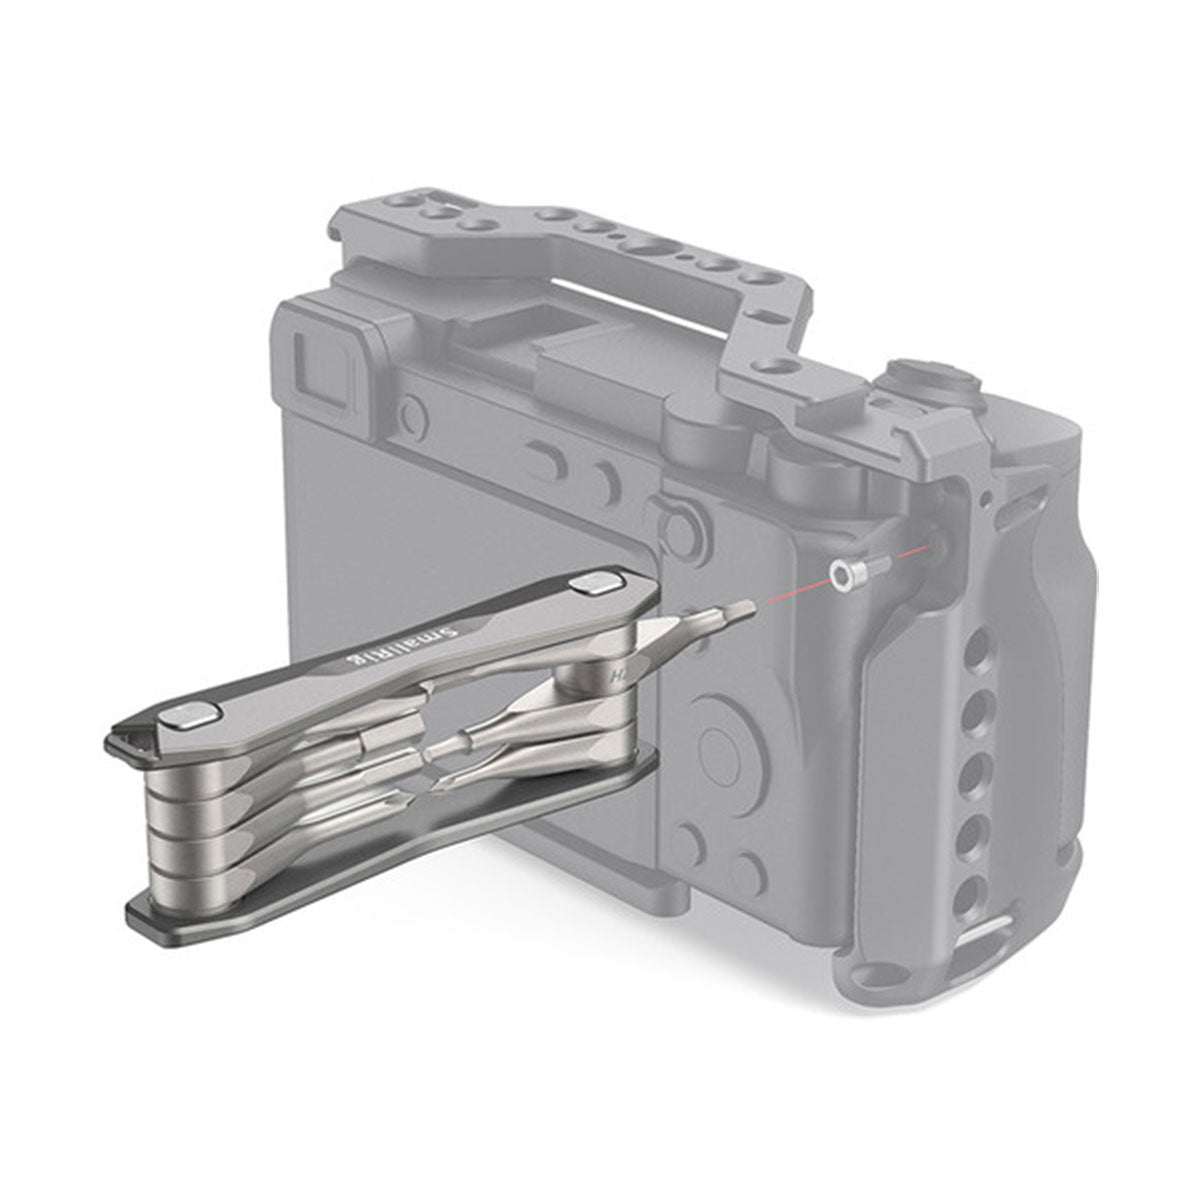 SmallRig Multi-Tool for Camera and Gimbal Accessories